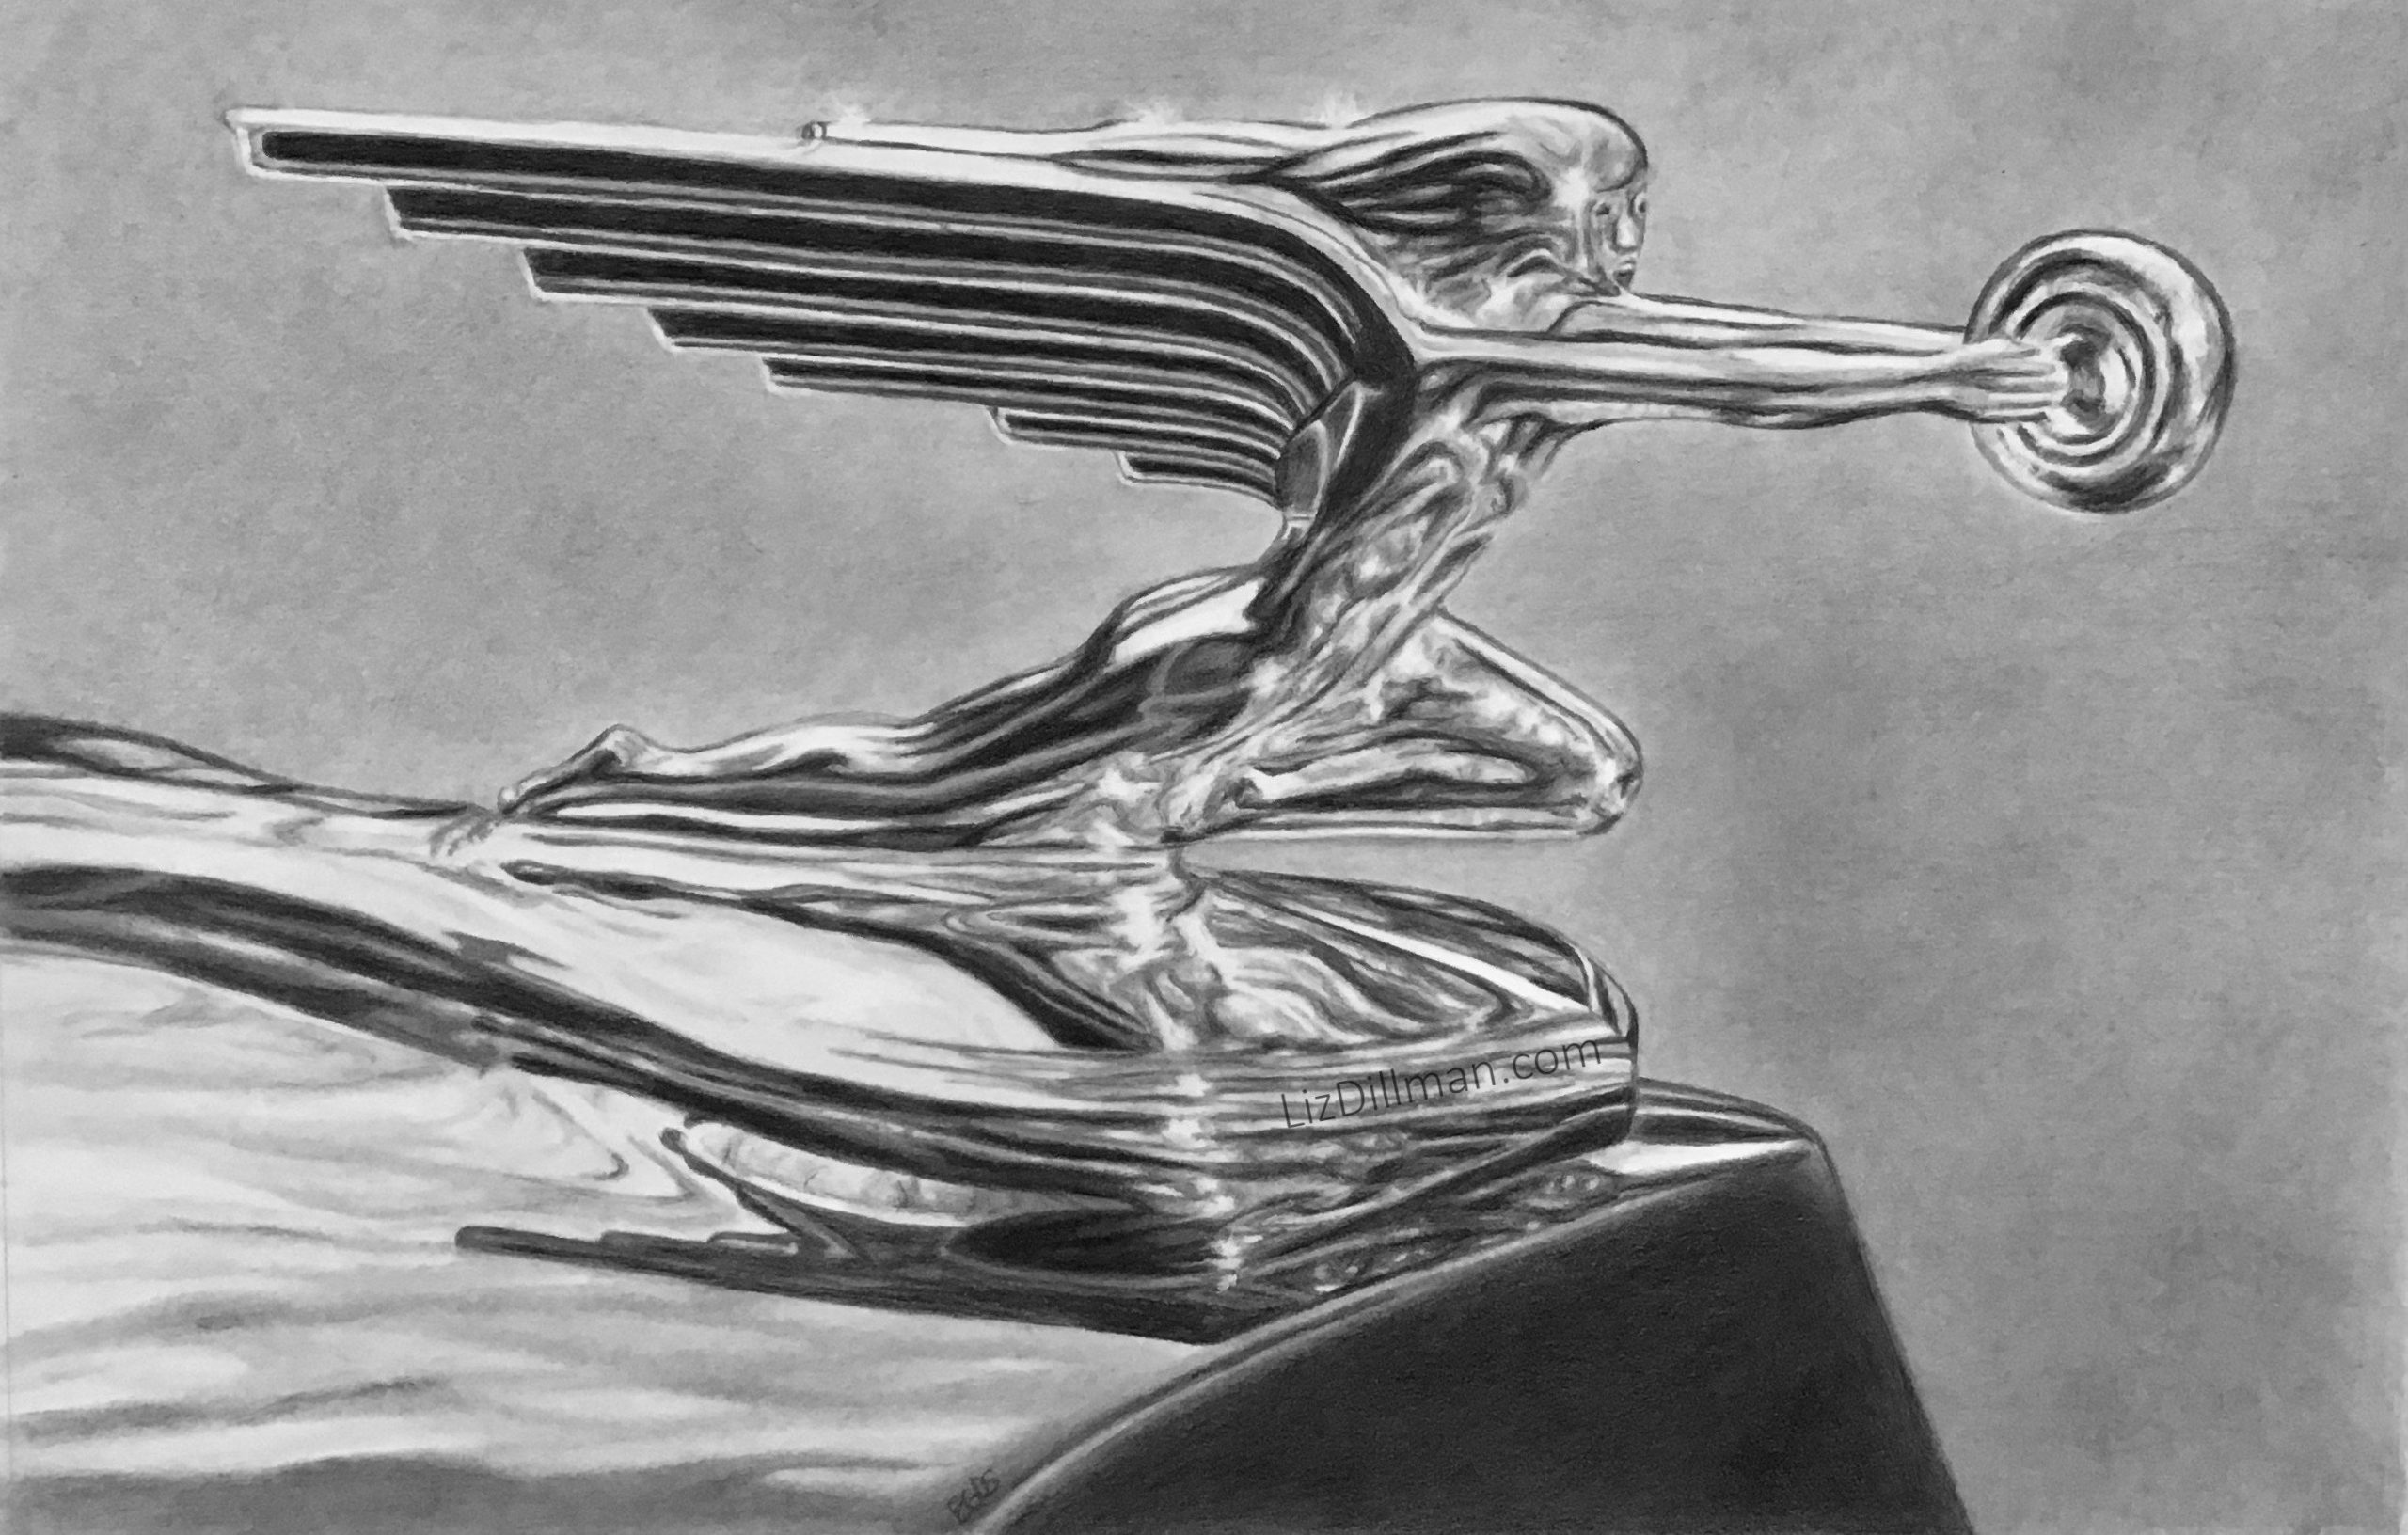 1936 Packard
Graphite on Paper
12.5" X 8"